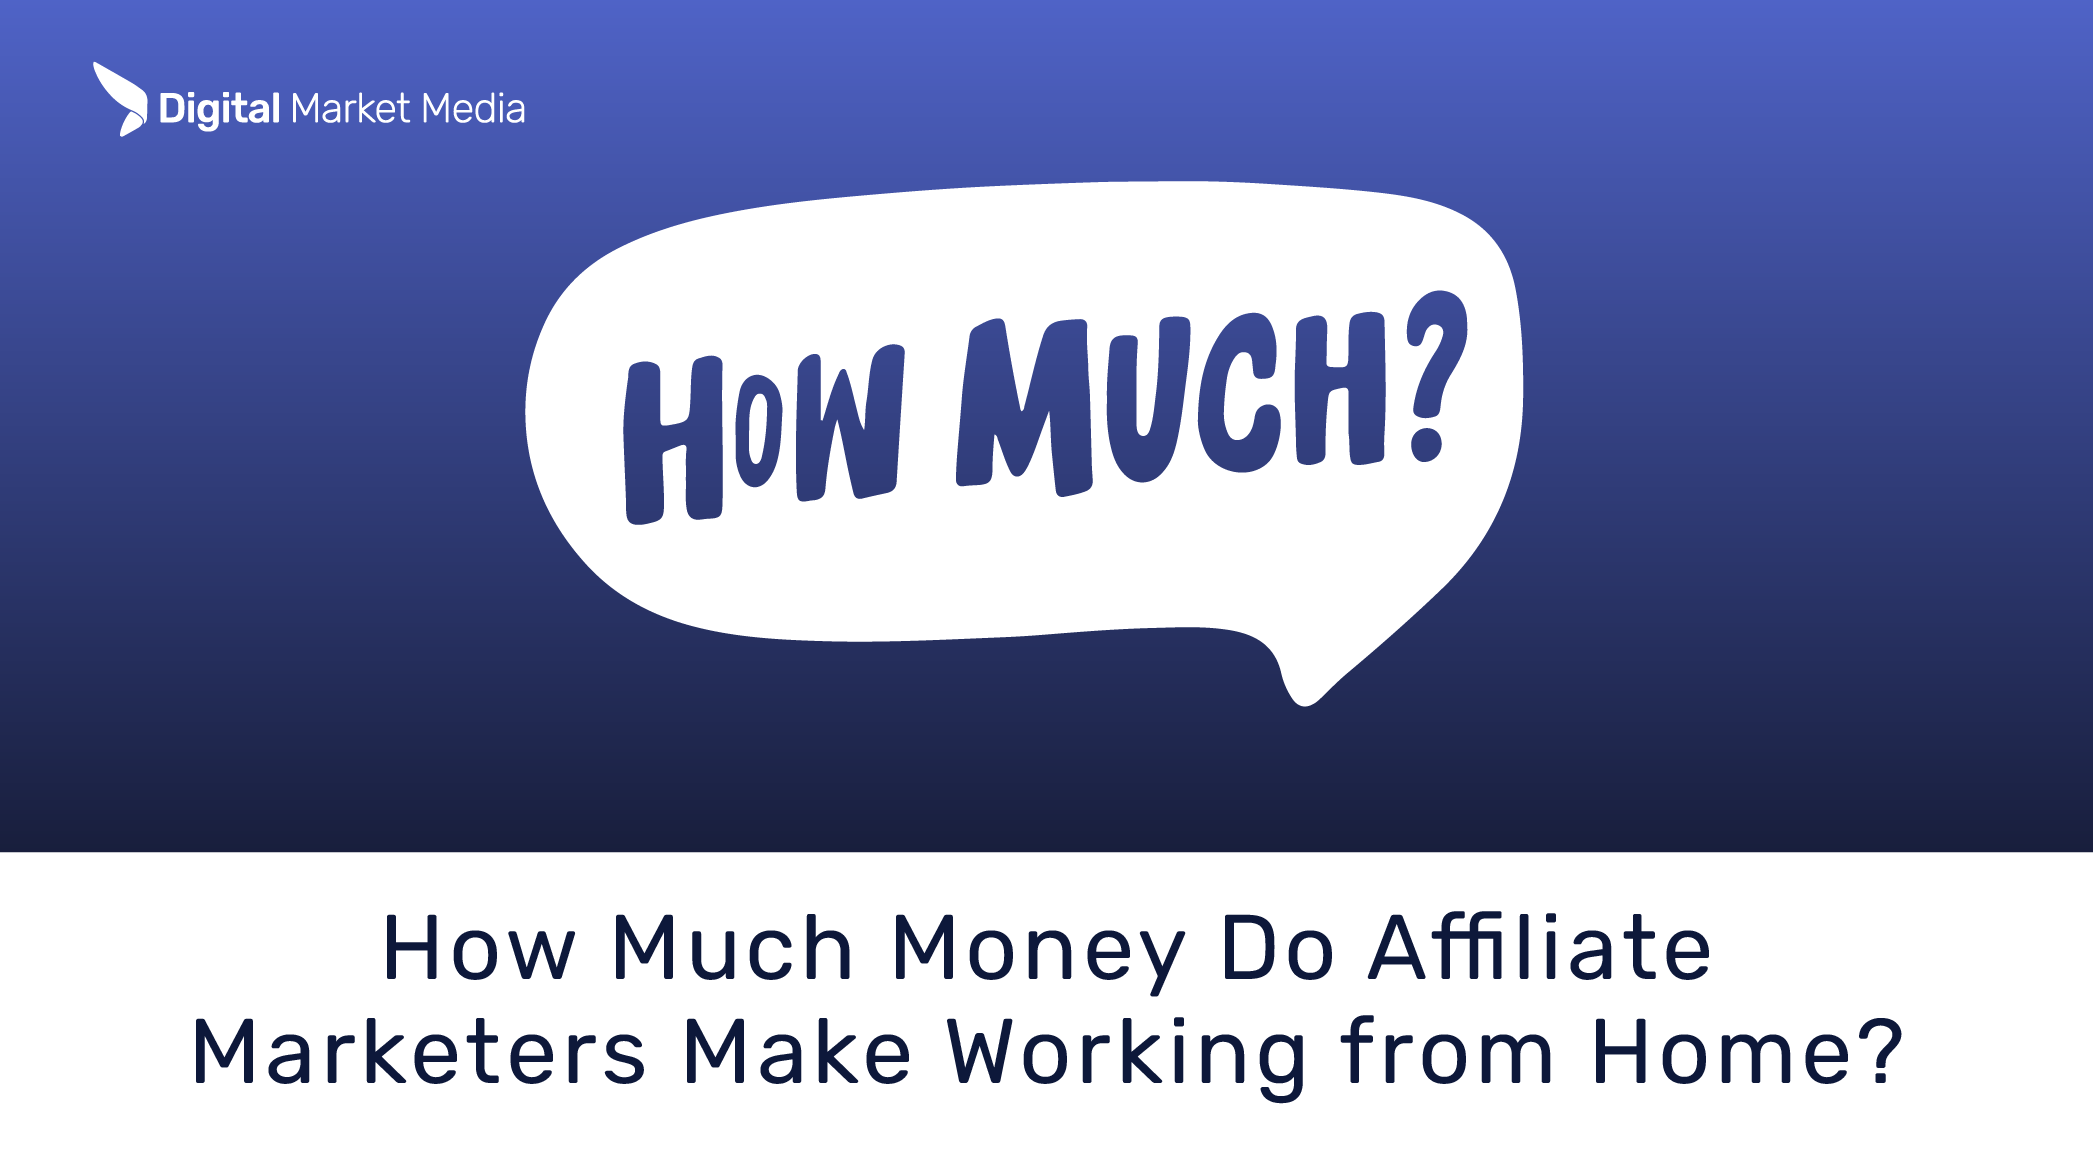 How Much Money Do Affiliate Marketers Make Working From Home?